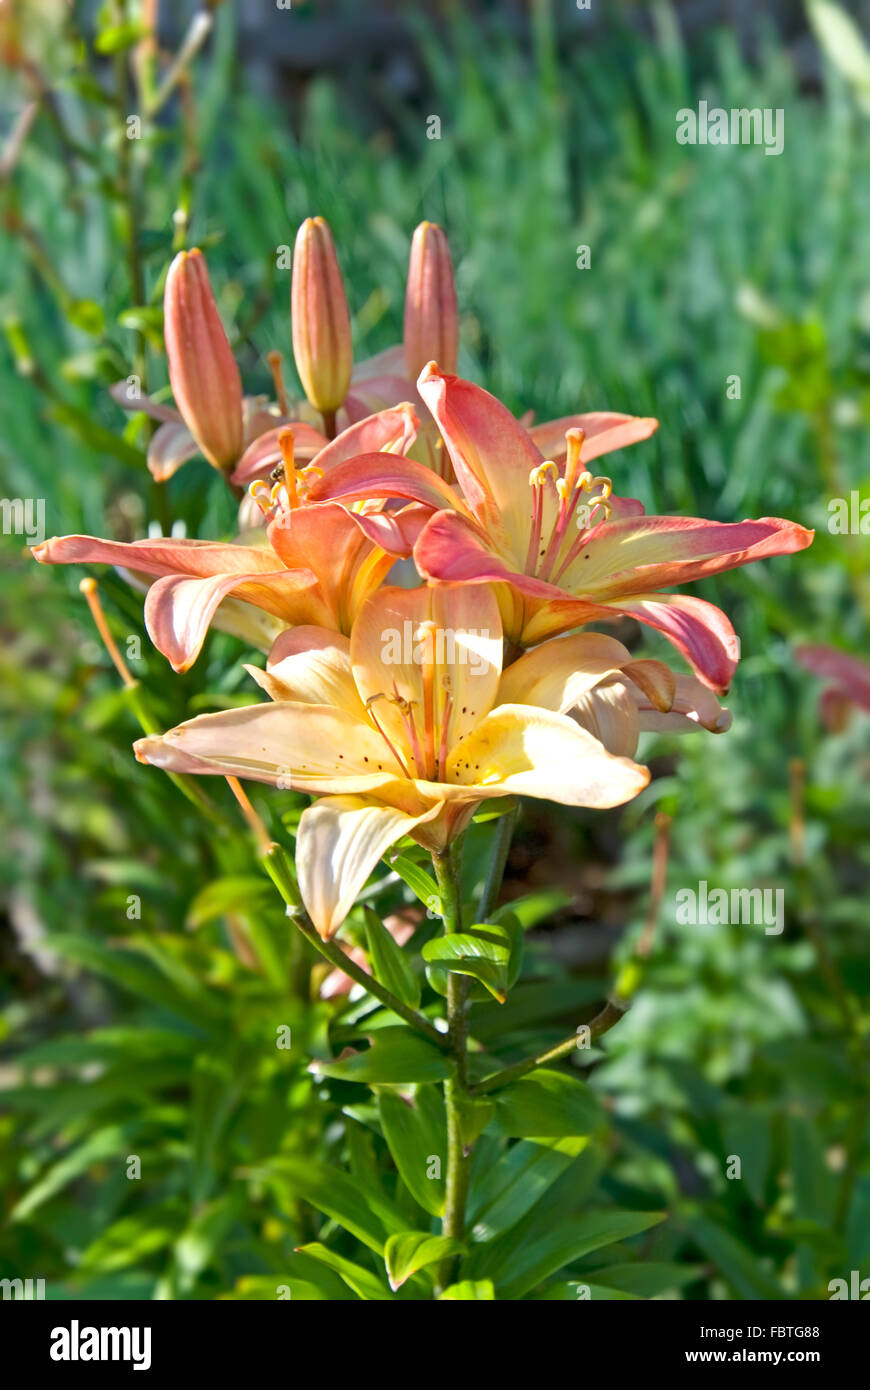 lily Stock Photo